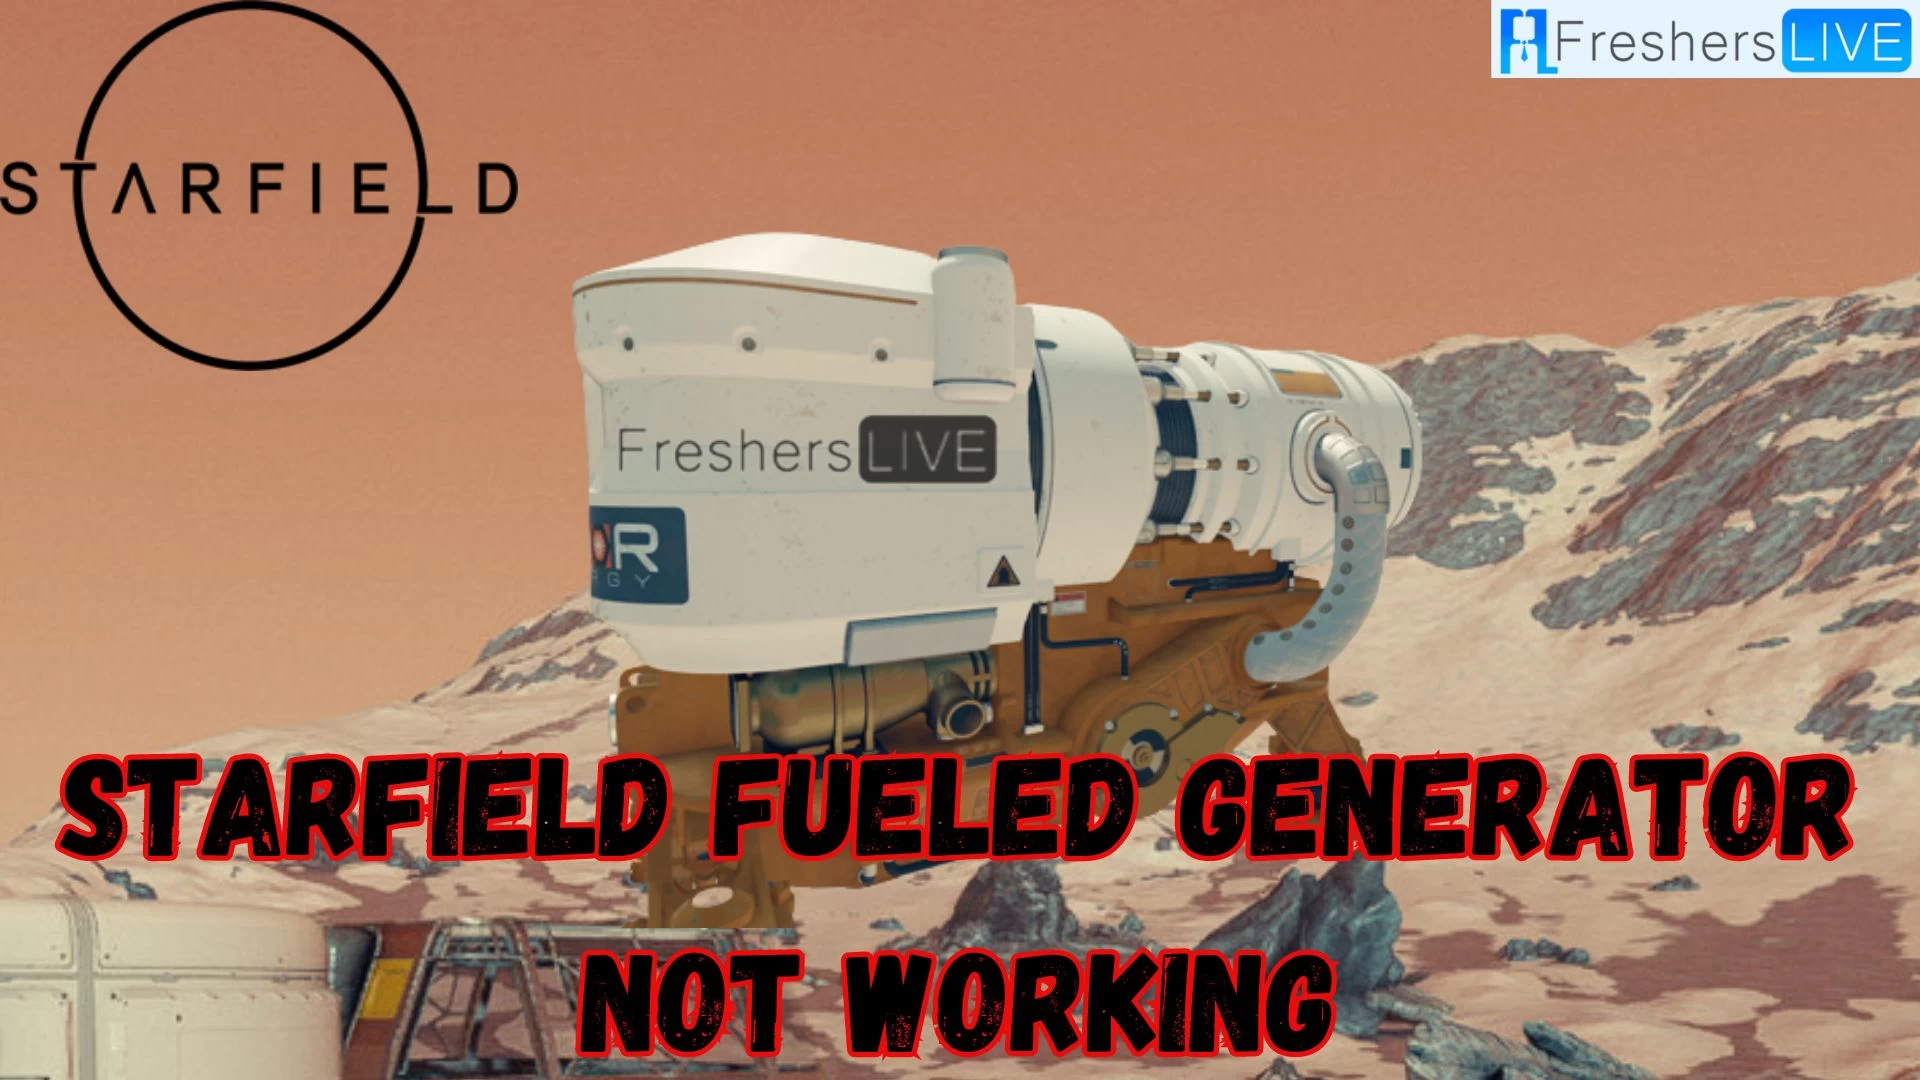 Starfield Fueled Generator Not Working, How to Fix Starfield Fueled Generator Not Working?